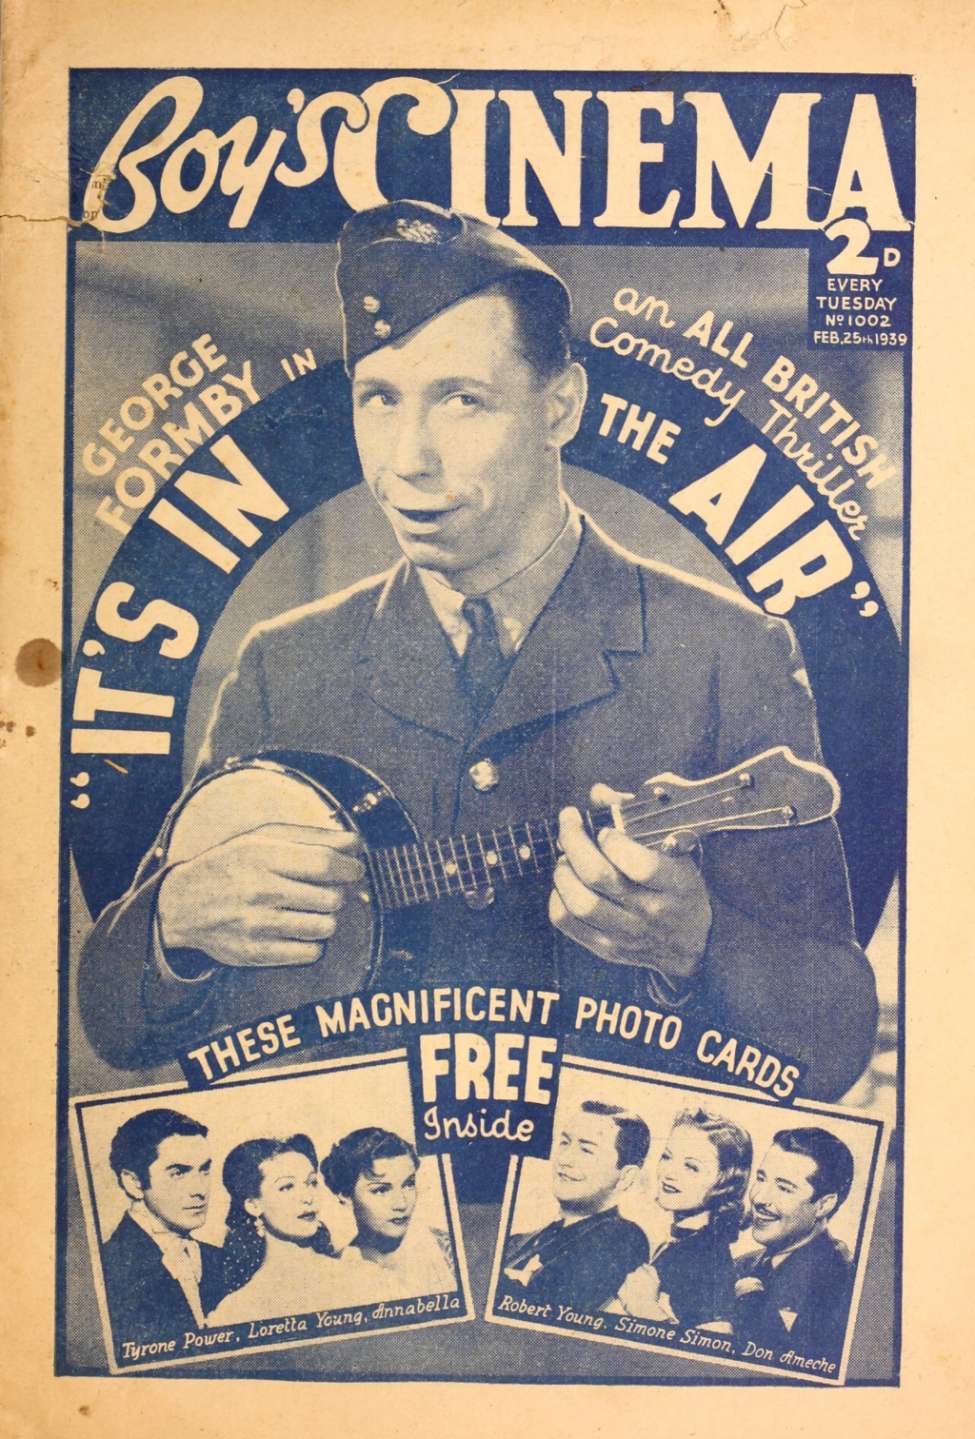 Comic Book Cover For Boy's Cinema 1002 - It’s In the Air - George Formby